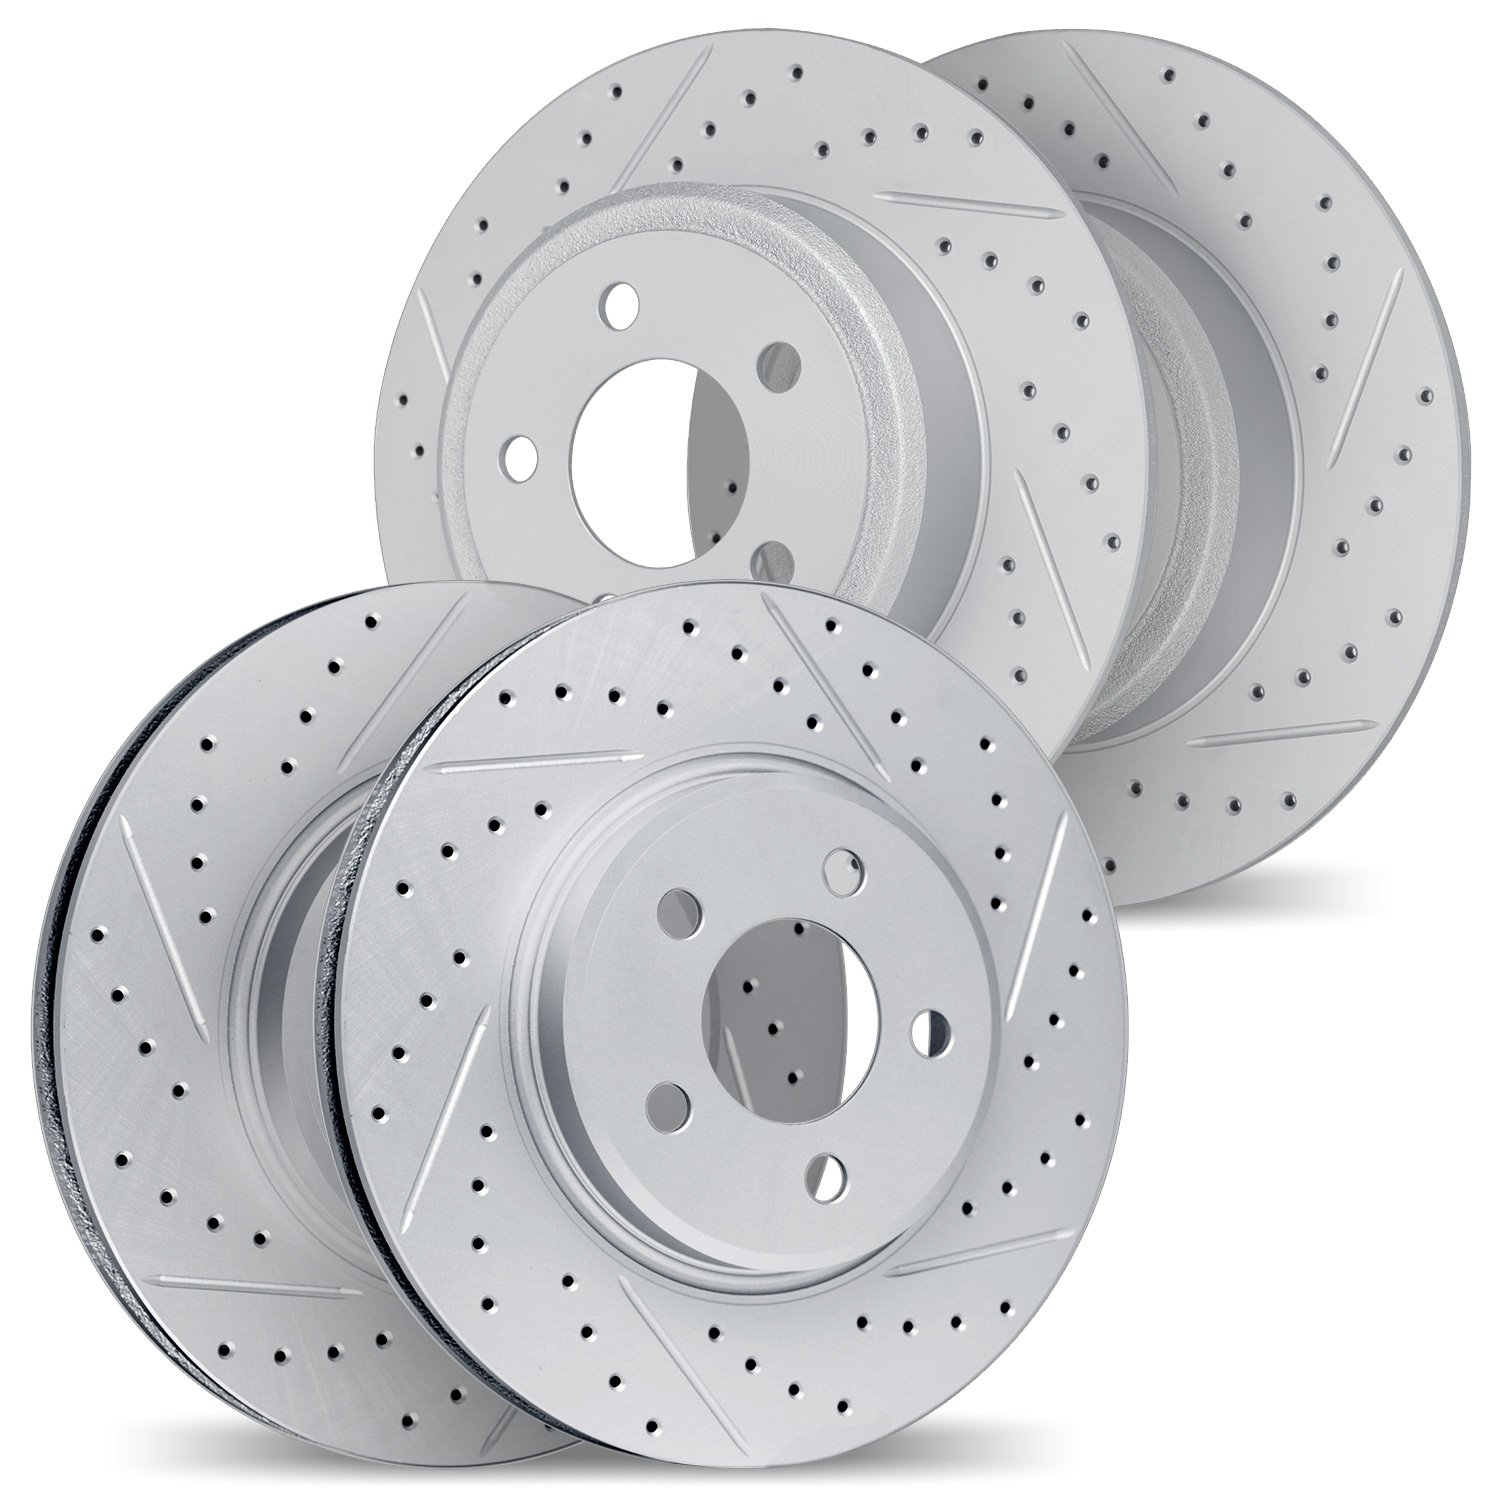 2004-03005 Geoperformance Drilled/Slotted Brake Rotors, 2015-2017 Kia/Hyundai/Genesis, Position: Front and Rear